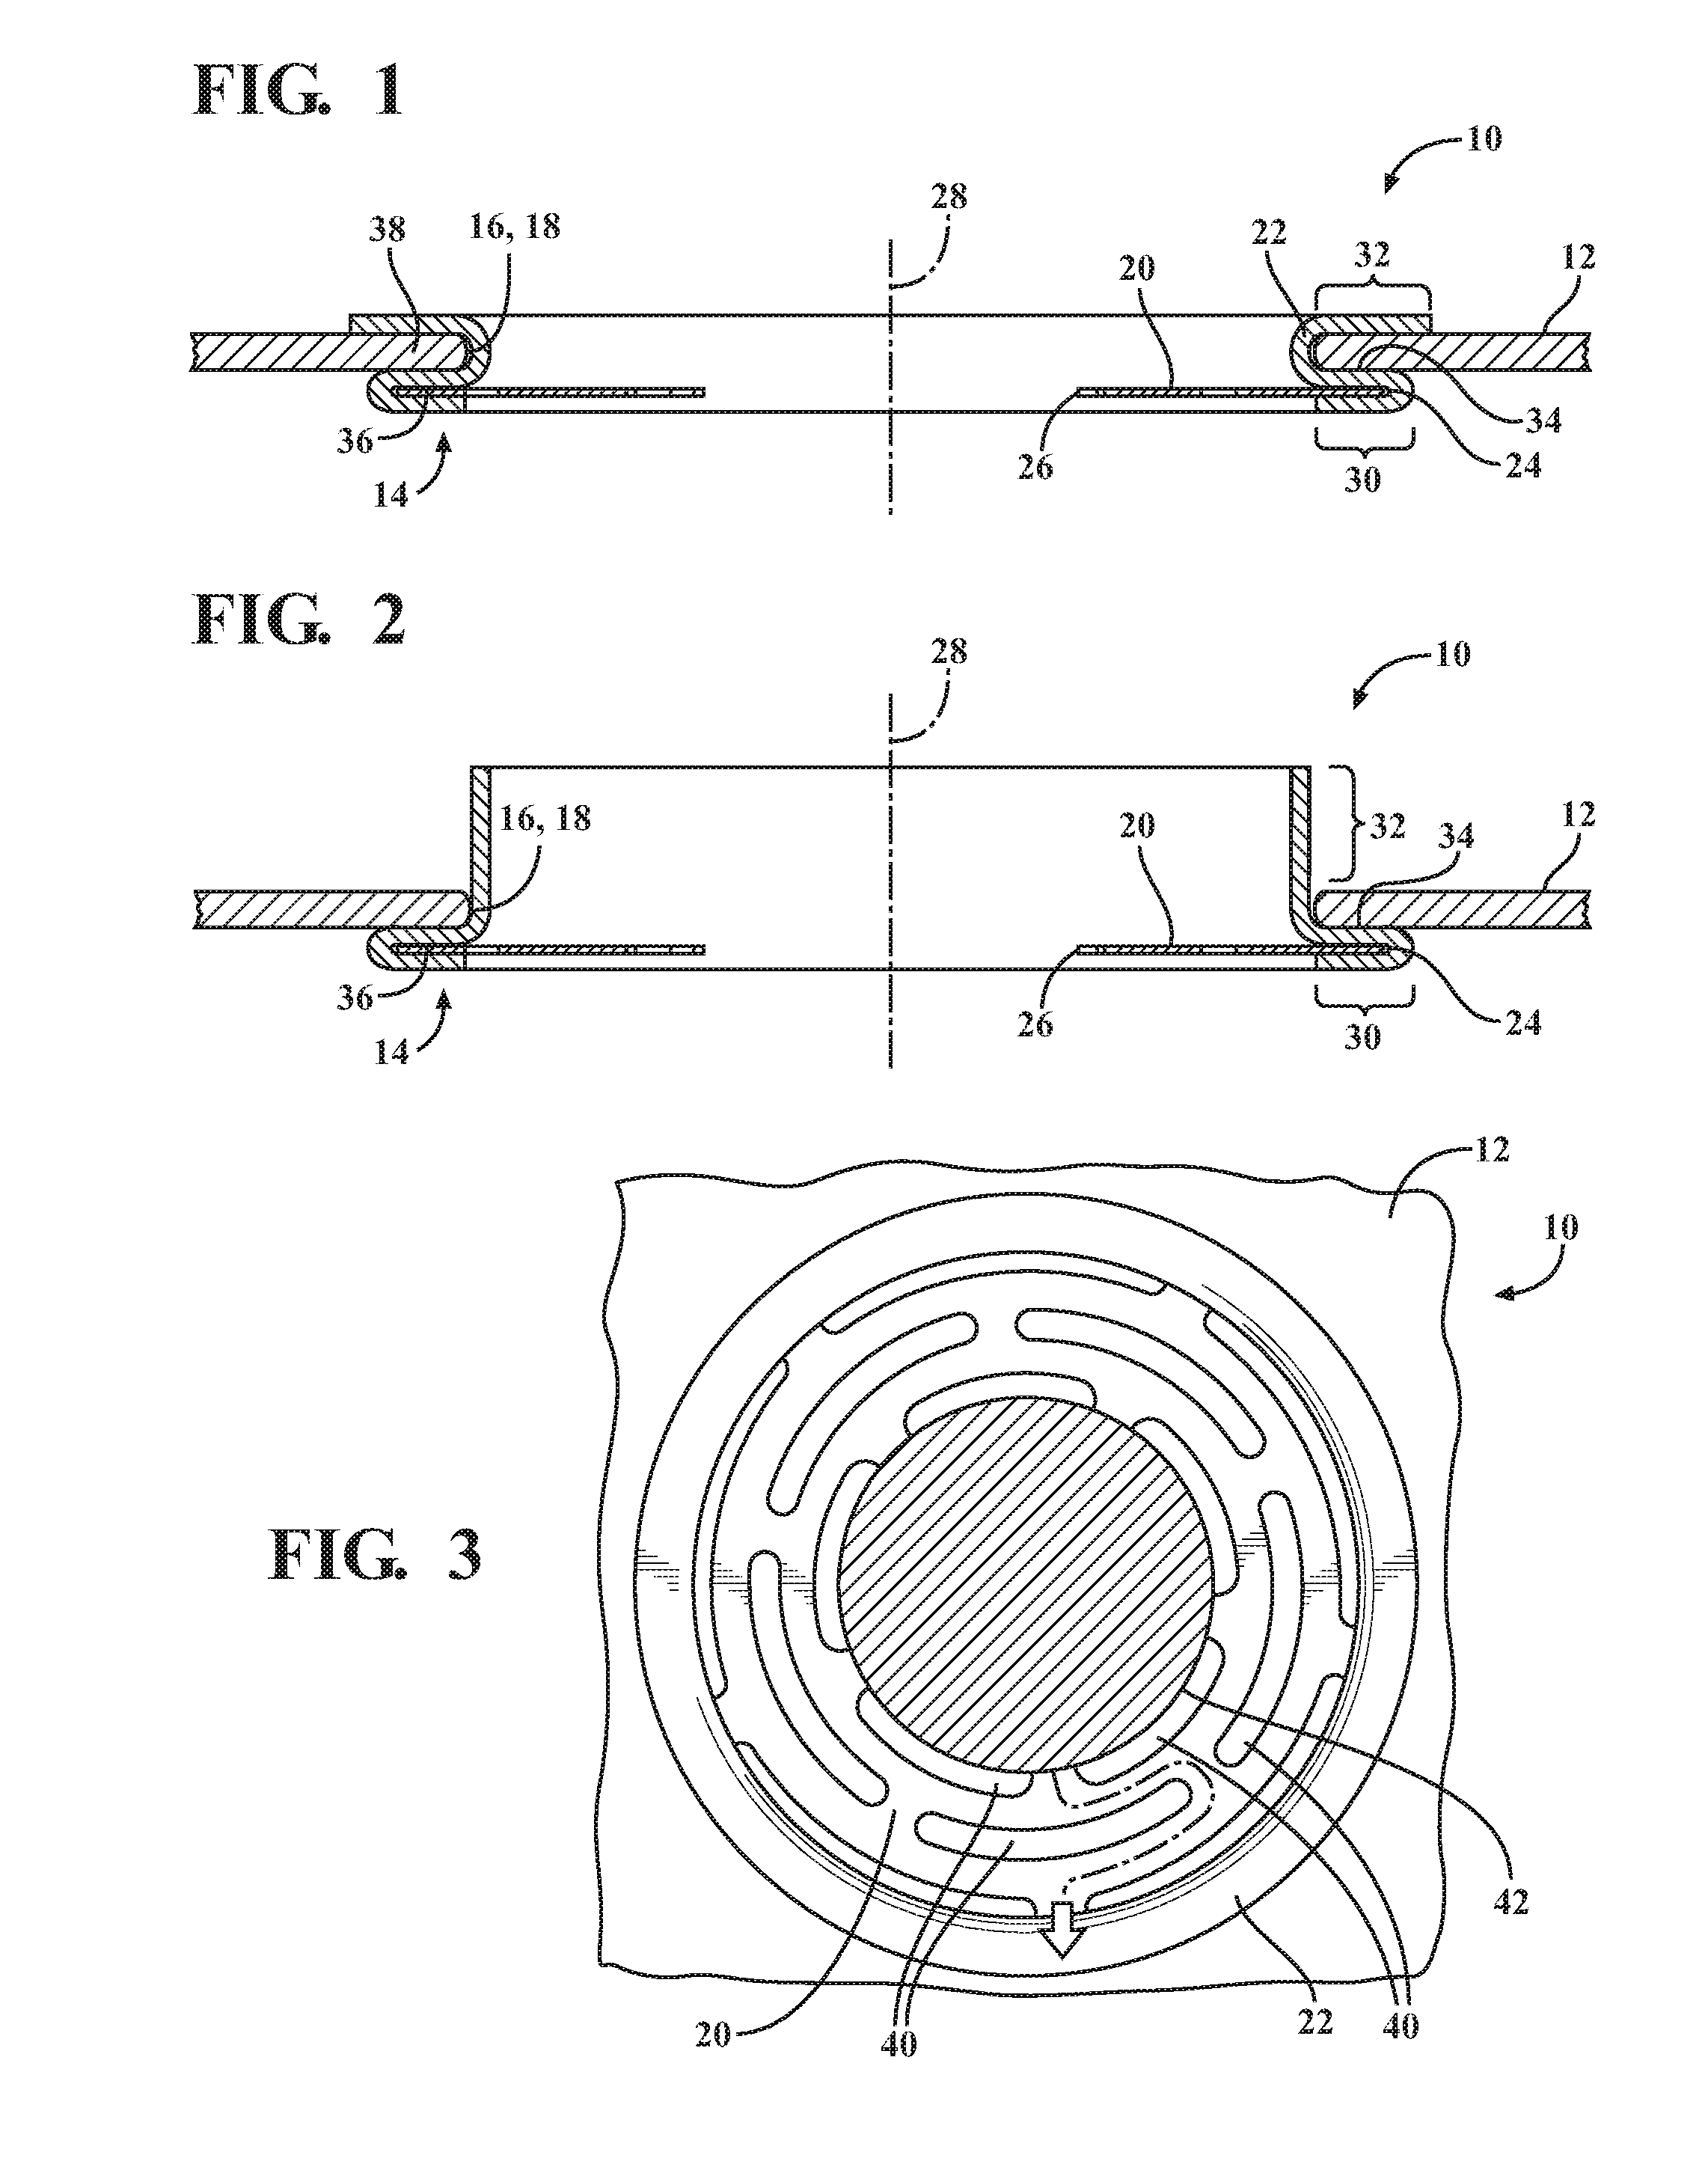 Heat and vibration mounting isolator for a heat shield, heat shield assembly and method of construction thereof